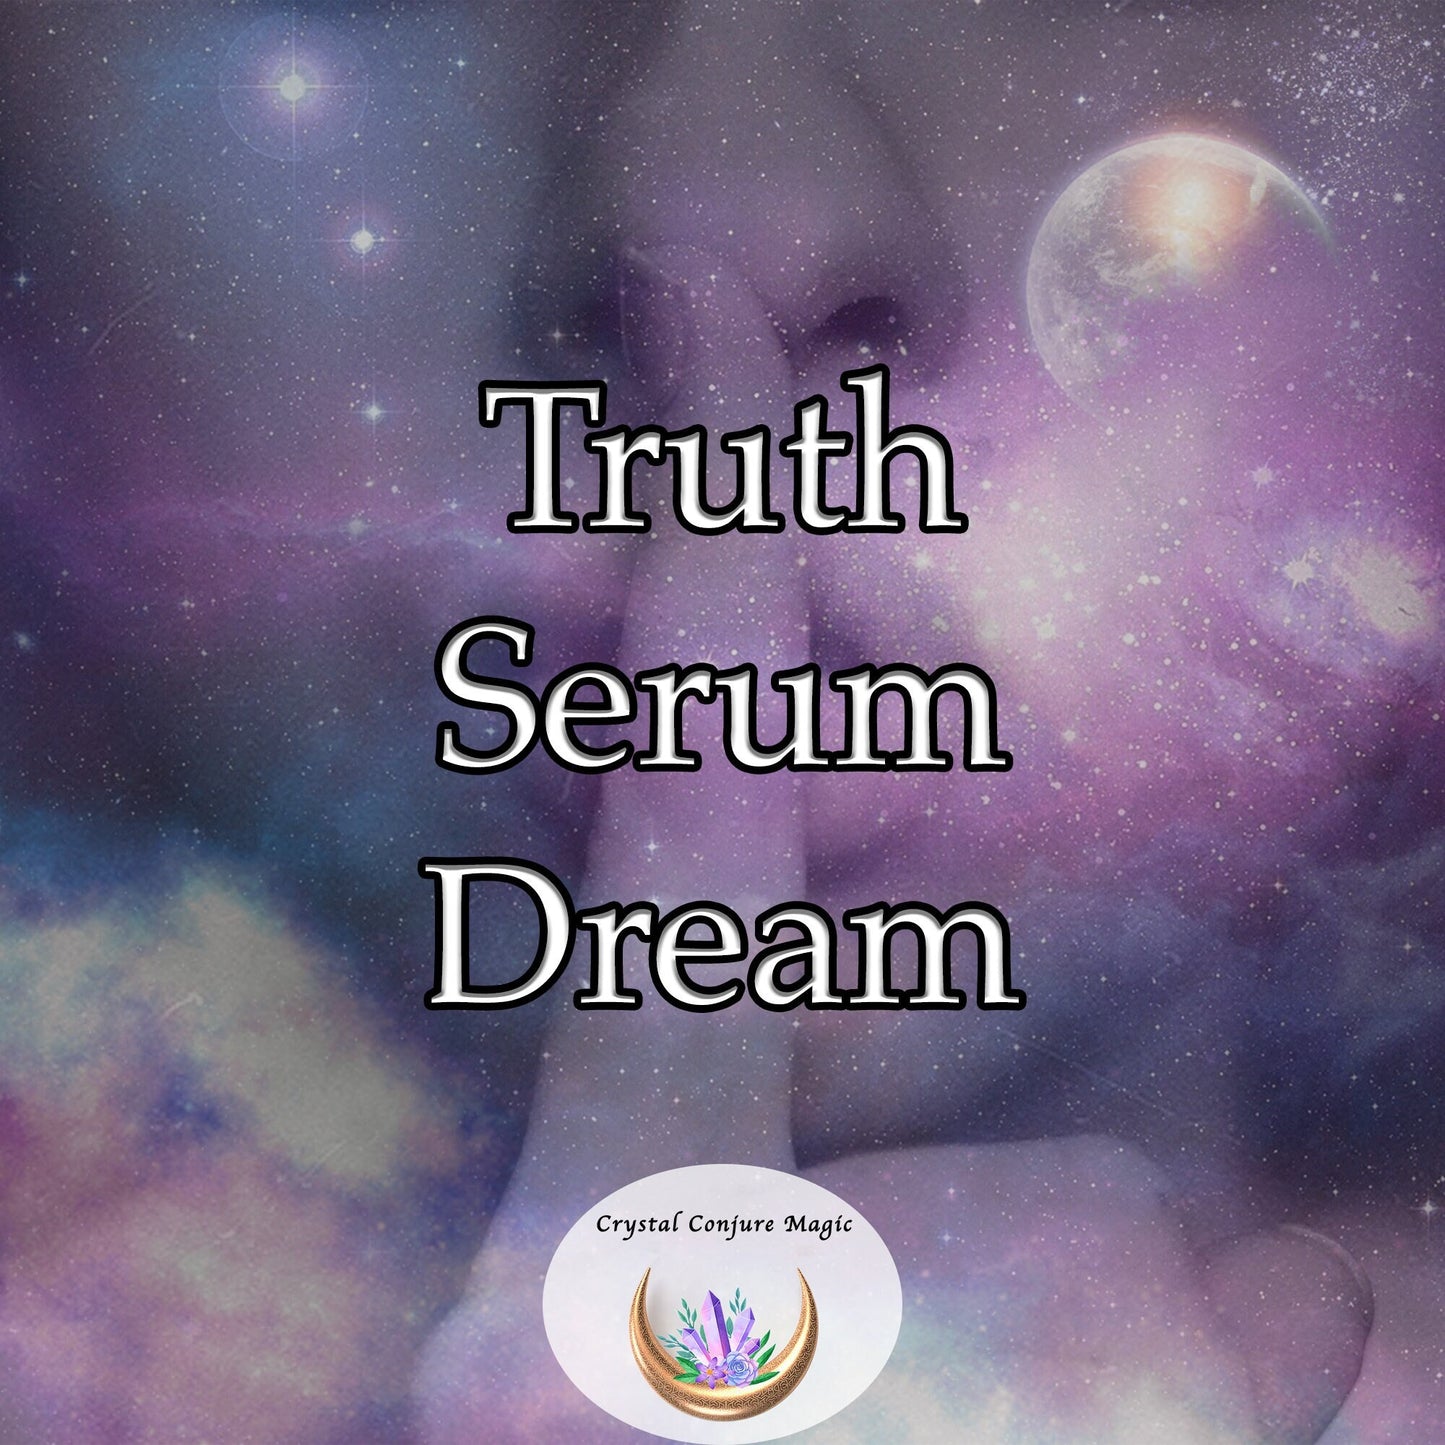 Truth Serum Dream - erase the cloud of uncertainty surrounding your relationships or interactions